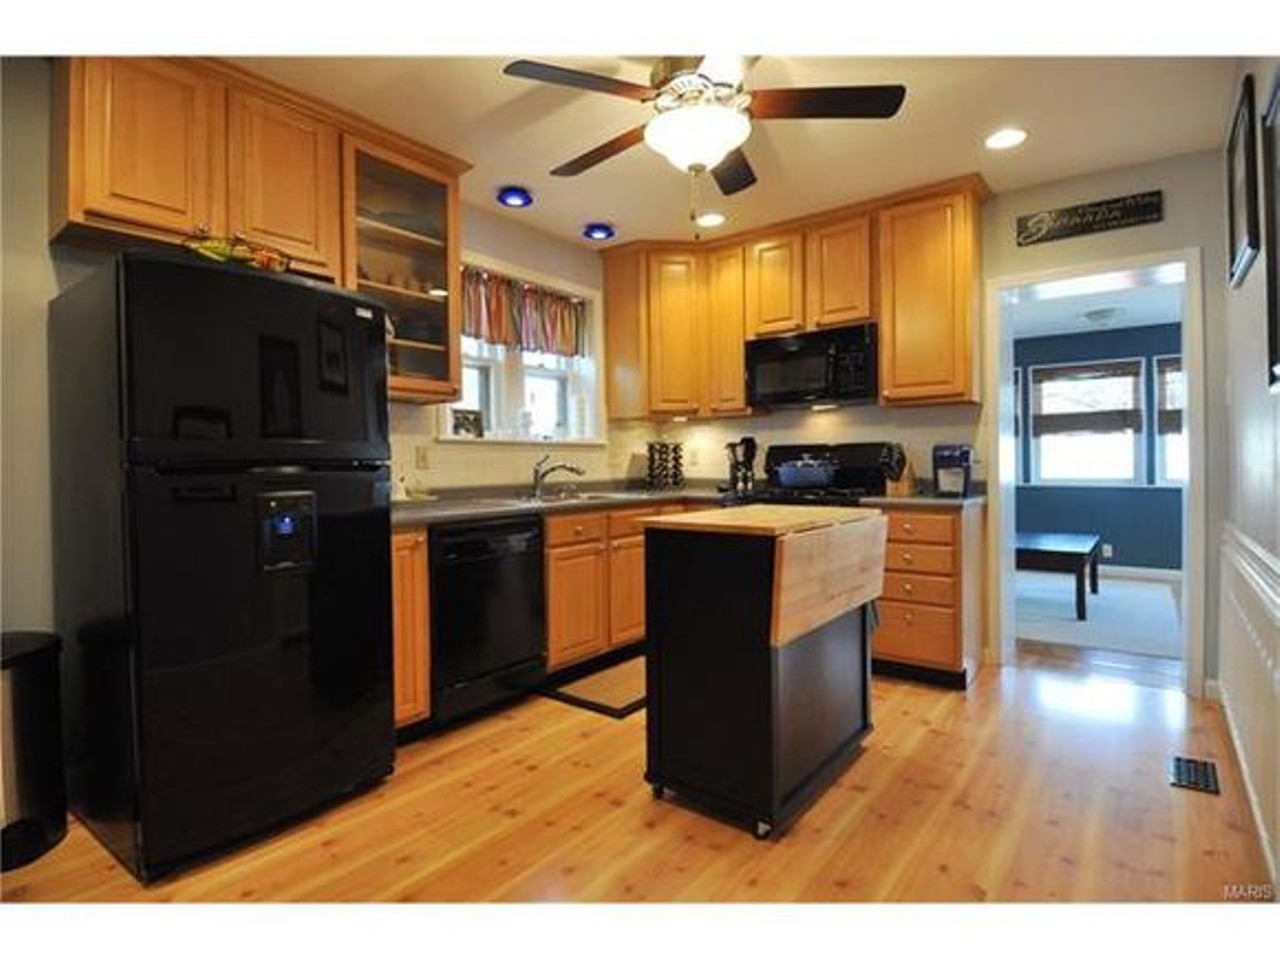 The kitchen features 42-inch maple cabinets.